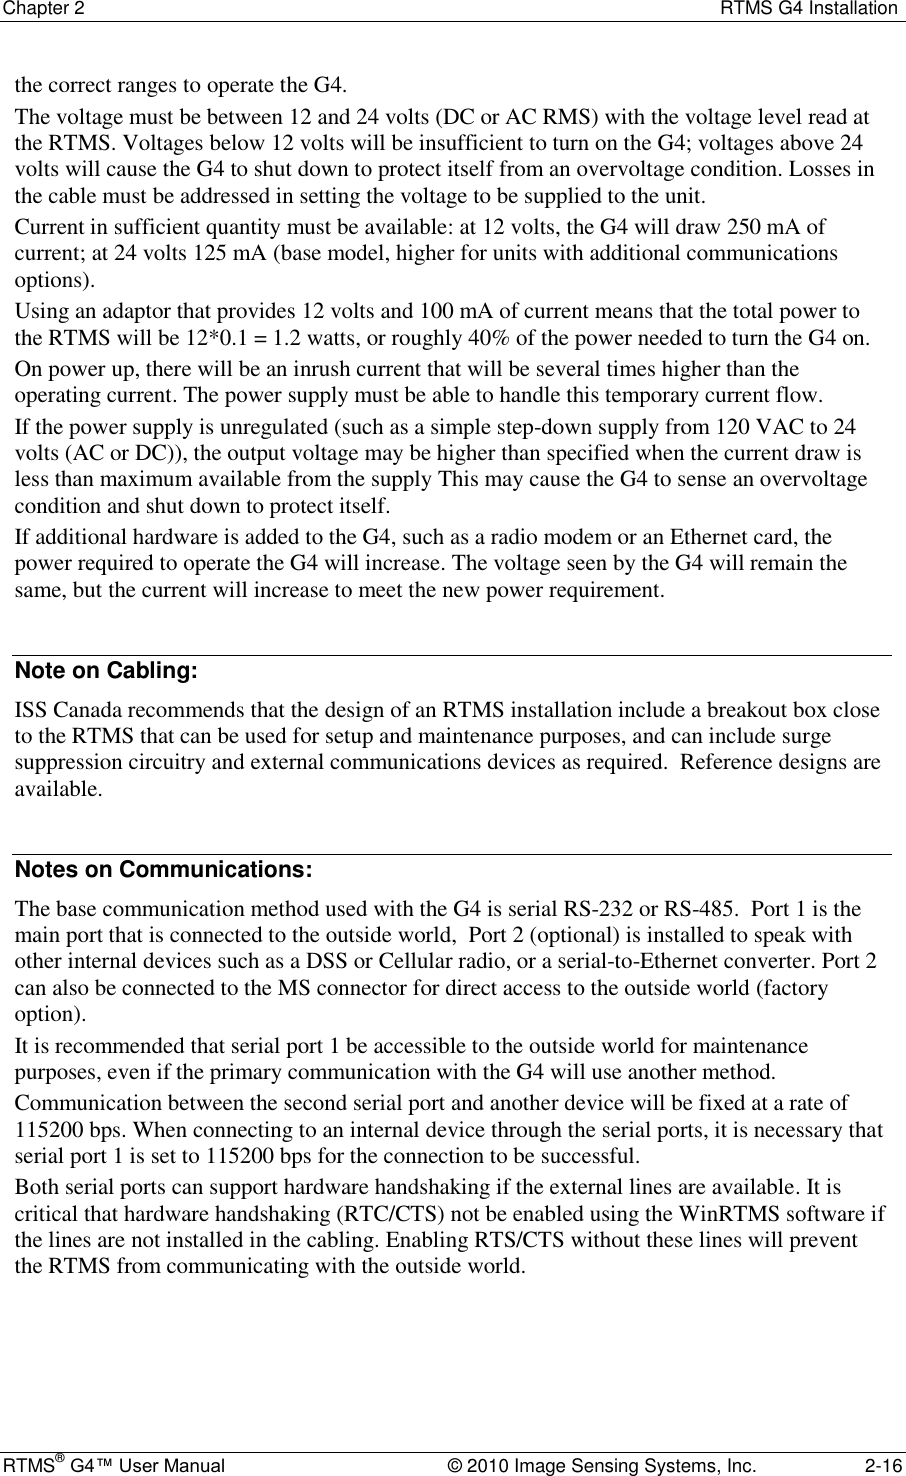 Chapter 2  RTMS G4 Installation RTMS® G4™ User Manual  © 2010 Image Sensing Systems, Inc.  2-16 the correct ranges to operate the G4.  The voltage must be between 12 and 24 volts (DC or AC RMS) with the voltage level read at the RTMS. Voltages below 12 volts will be insufficient to turn on the G4; voltages above 24 volts will cause the G4 to shut down to protect itself from an overvoltage condition. Losses in the cable must be addressed in setting the voltage to be supplied to the unit. Current in sufficient quantity must be available: at 12 volts, the G4 will draw 250 mA of current; at 24 volts 125 mA (base model, higher for units with additional communications options). Using an adaptor that provides 12 volts and 100 mA of current means that the total power to the RTMS will be 12*0.1 = 1.2 watts, or roughly 40% of the power needed to turn the G4 on. On power up, there will be an inrush current that will be several times higher than the operating current. The power supply must be able to handle this temporary current flow. If the power supply is unregulated (such as a simple step-down supply from 120 VAC to 24 volts (AC or DC)), the output voltage may be higher than specified when the current draw is less than maximum available from the supply This may cause the G4 to sense an overvoltage condition and shut down to protect itself. If additional hardware is added to the G4, such as a radio modem or an Ethernet card, the power required to operate the G4 will increase. The voltage seen by the G4 will remain the same, but the current will increase to meet the new power requirement.  Note on Cabling: ISS Canada recommends that the design of an RTMS installation include a breakout box close to the RTMS that can be used for setup and maintenance purposes, and can include surge suppression circuitry and external communications devices as required.  Reference designs are available.  Notes on Communications: The base communication method used with the G4 is serial RS-232 or RS-485.  Port 1 is the main port that is connected to the outside world,  Port 2 (optional) is installed to speak with other internal devices such as a DSS or Cellular radio, or a serial-to-Ethernet converter. Port 2 can also be connected to the MS connector for direct access to the outside world (factory option). It is recommended that serial port 1 be accessible to the outside world for maintenance purposes, even if the primary communication with the G4 will use another method. Communication between the second serial port and another device will be fixed at a rate of 115200 bps. When connecting to an internal device through the serial ports, it is necessary that serial port 1 is set to 115200 bps for the connection to be successful. Both serial ports can support hardware handshaking if the external lines are available. It is critical that hardware handshaking (RTC/CTS) not be enabled using the WinRTMS software if the lines are not installed in the cabling. Enabling RTS/CTS without these lines will prevent the RTMS from communicating with the outside world. 